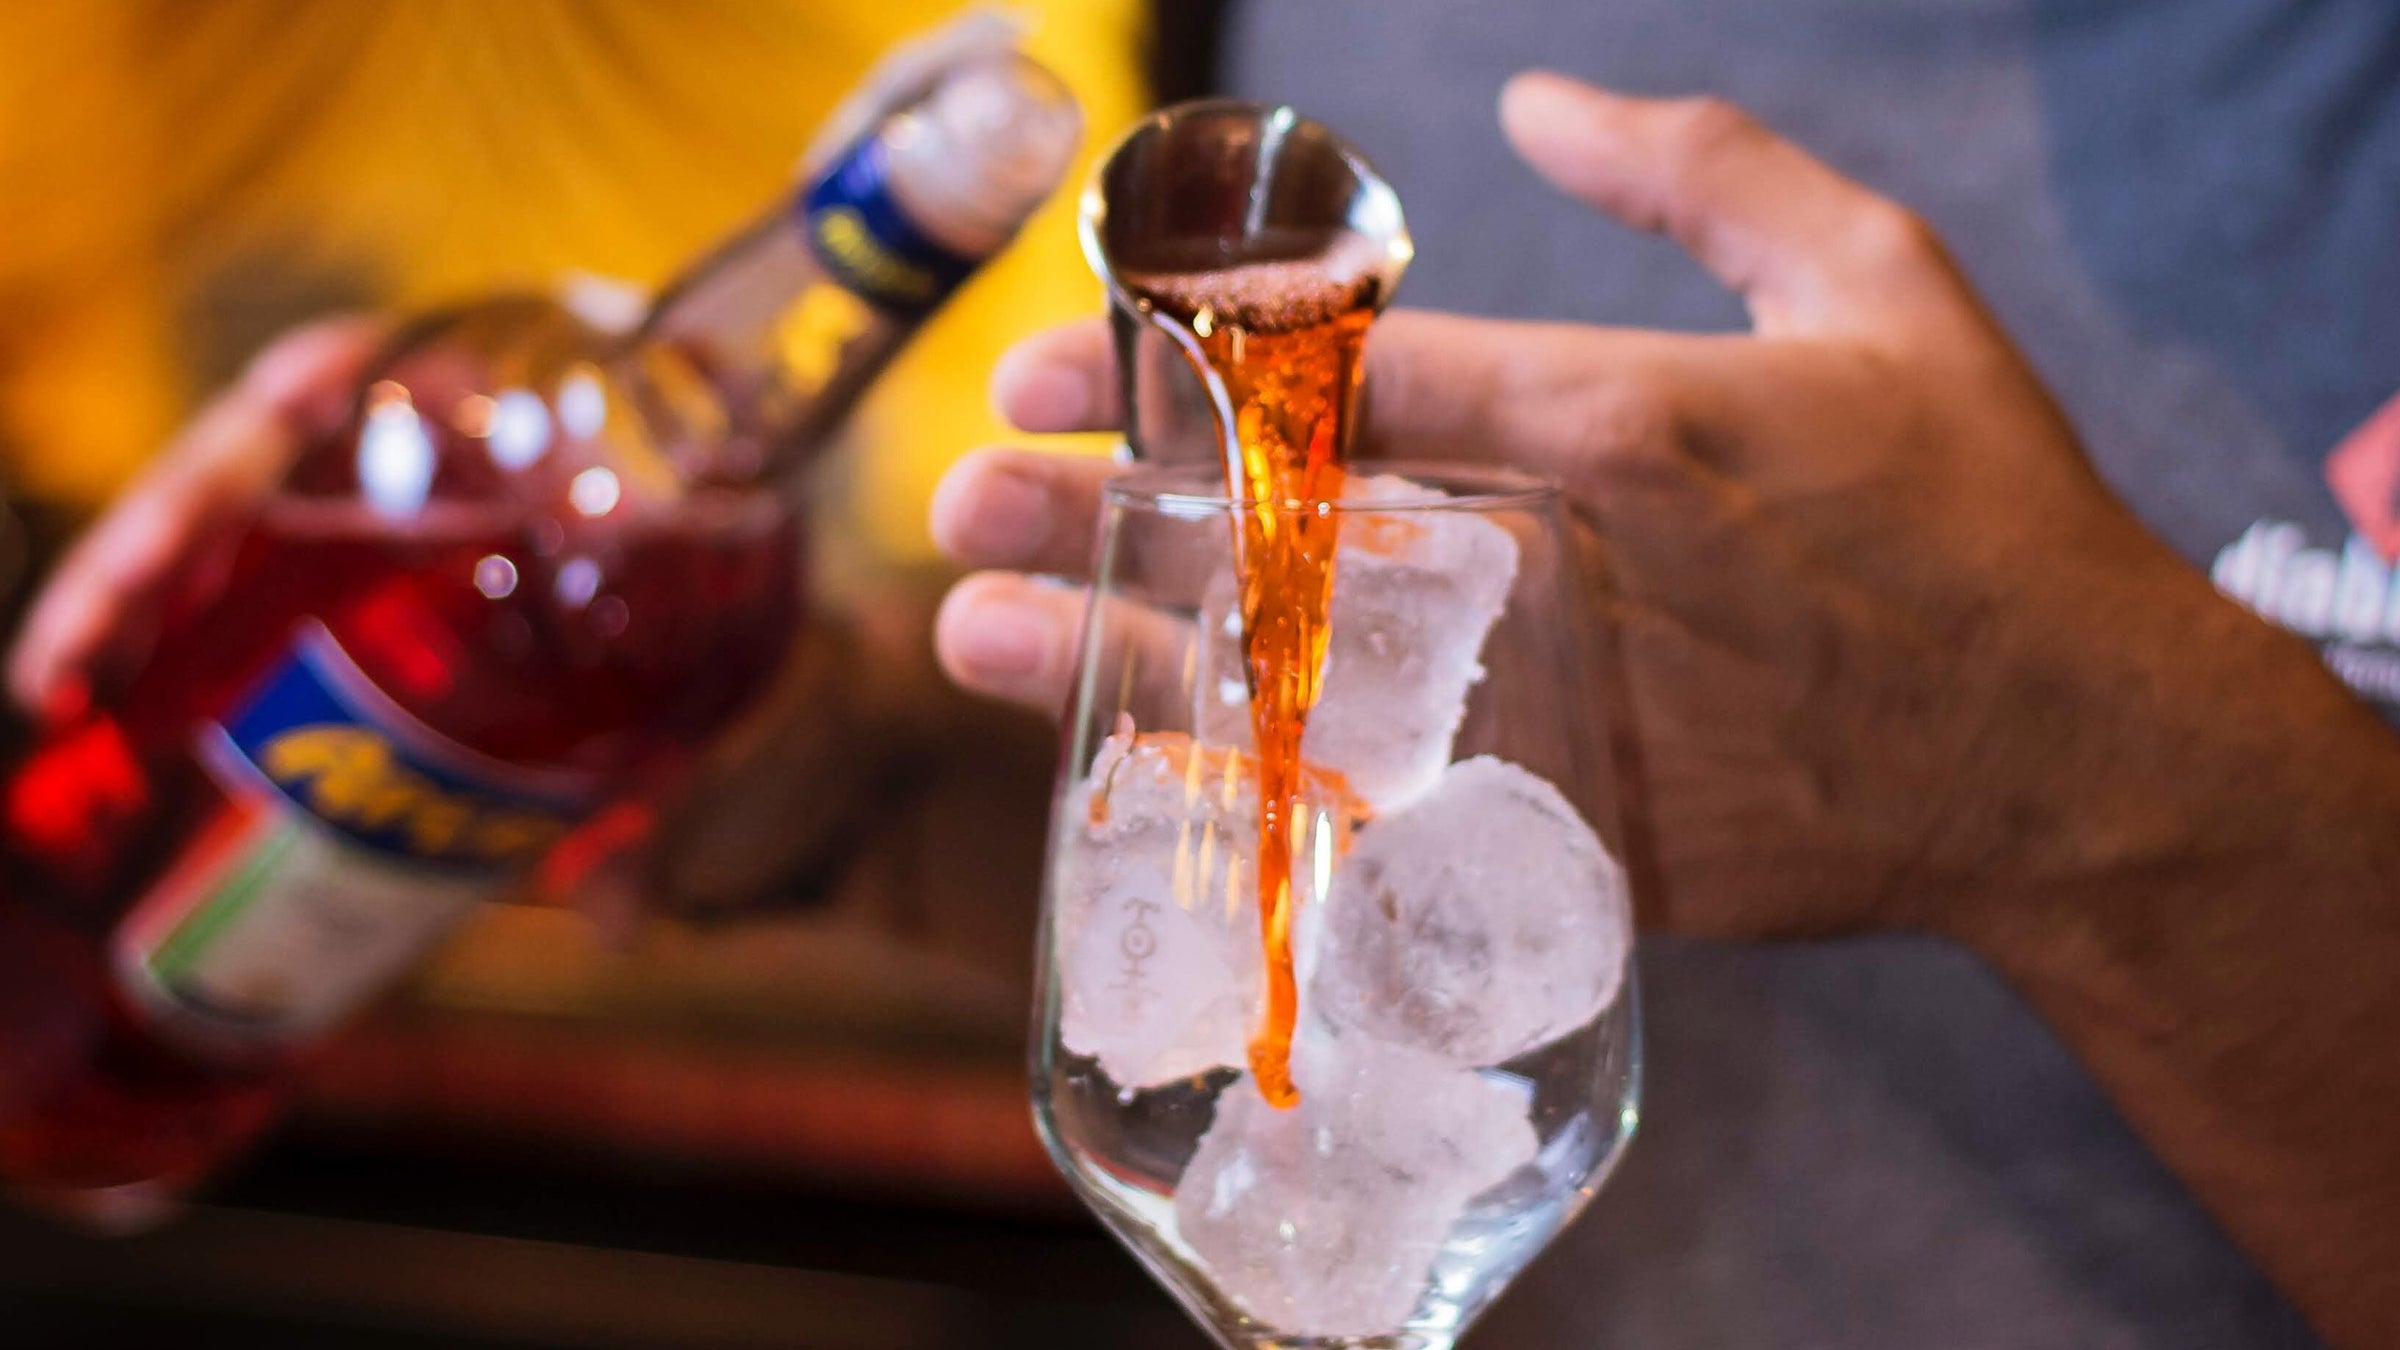 pouring aperol into an iced glass